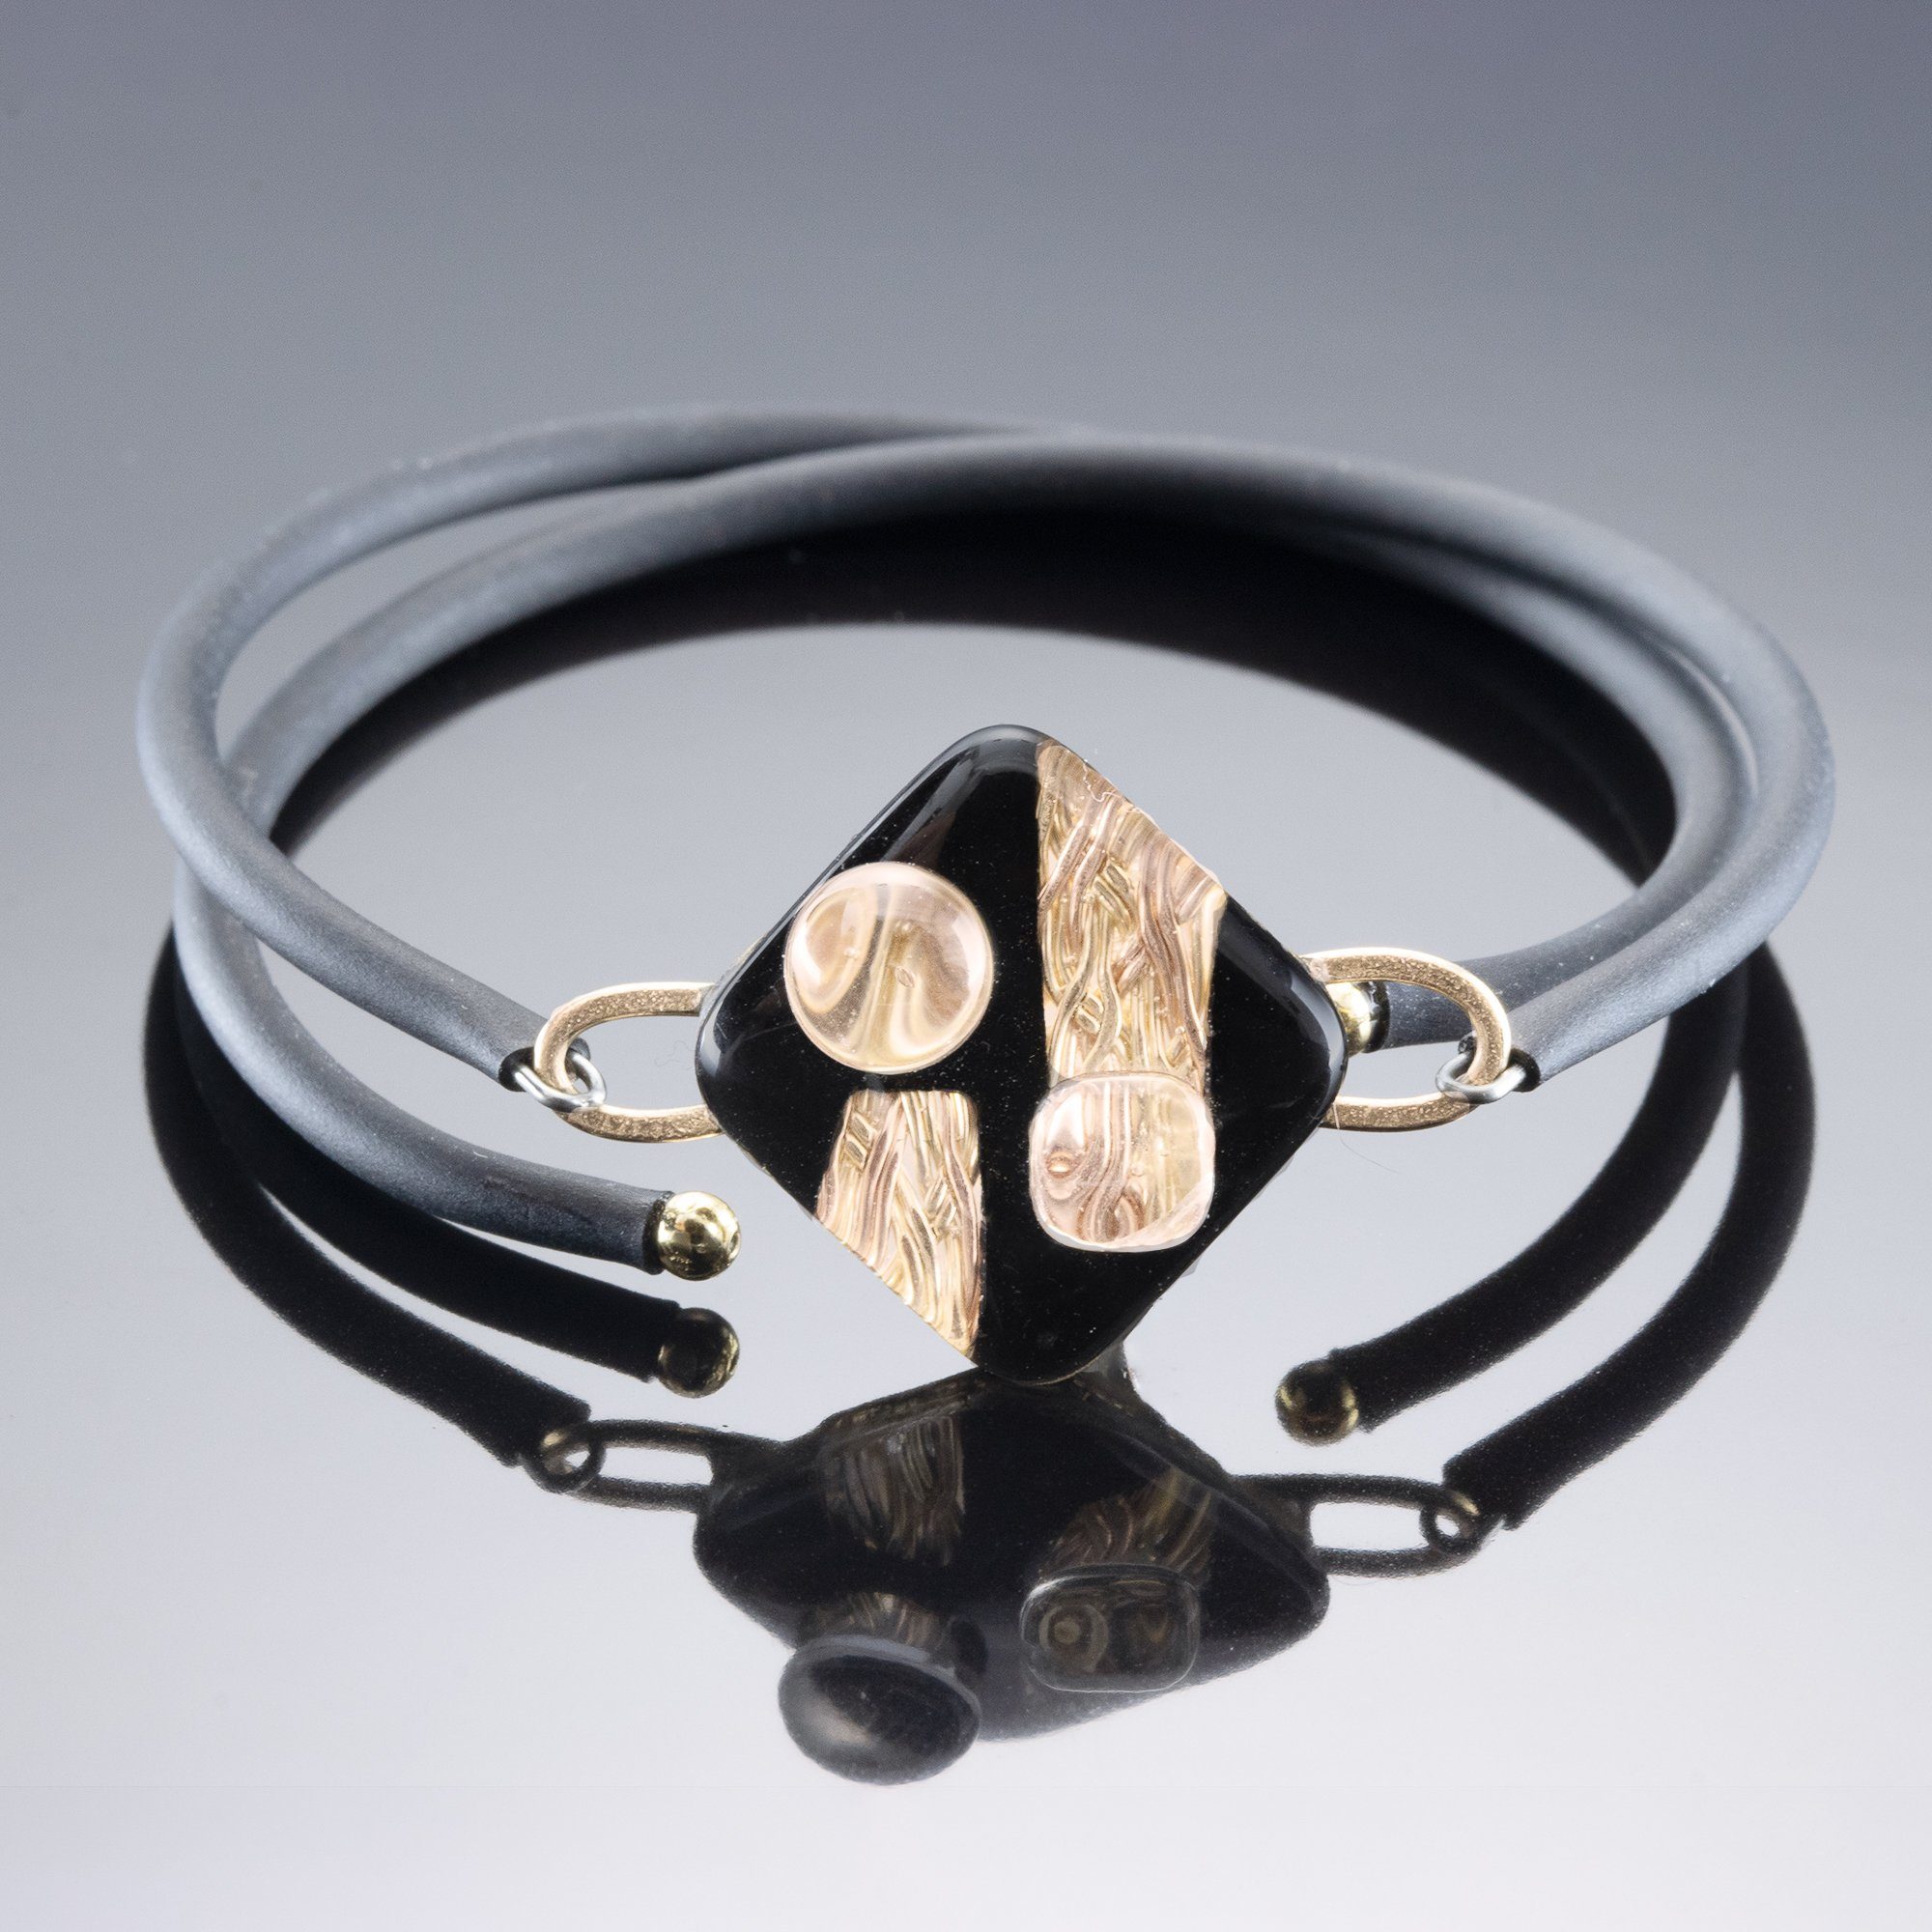 Black and Gold Art Deco Inspired Wrap Bracelet in both 14K Yellow and Rose Gold Fill